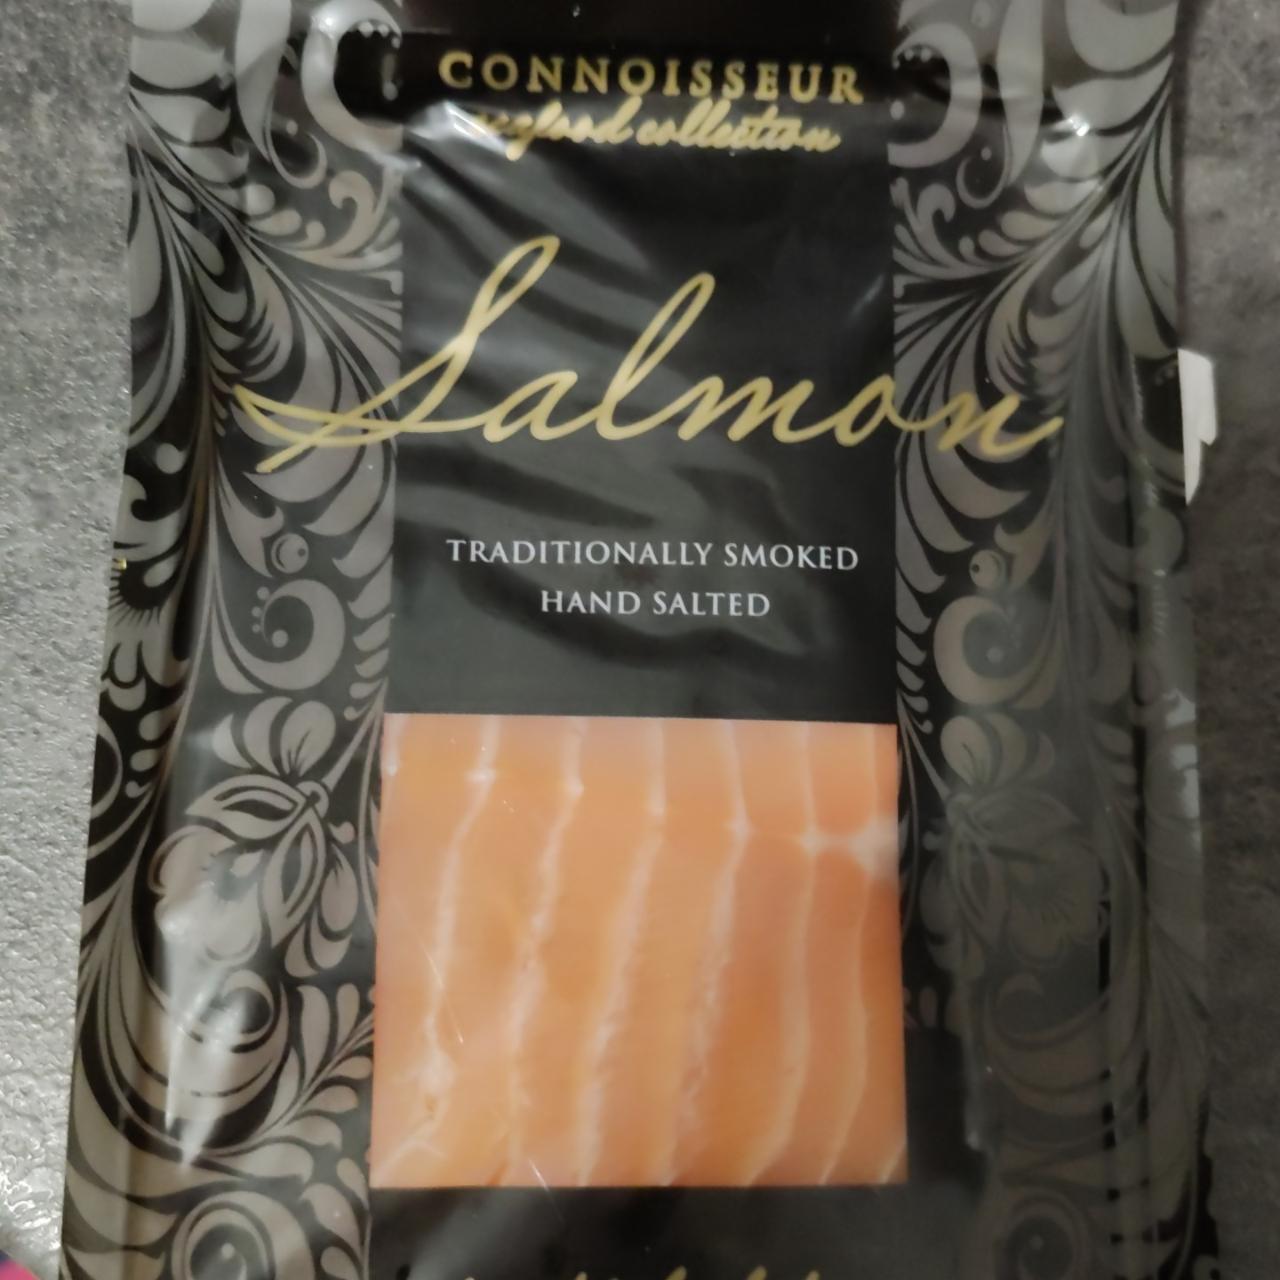 Fotografie - Salmon Traditionally smoked hand salted Connoisseur